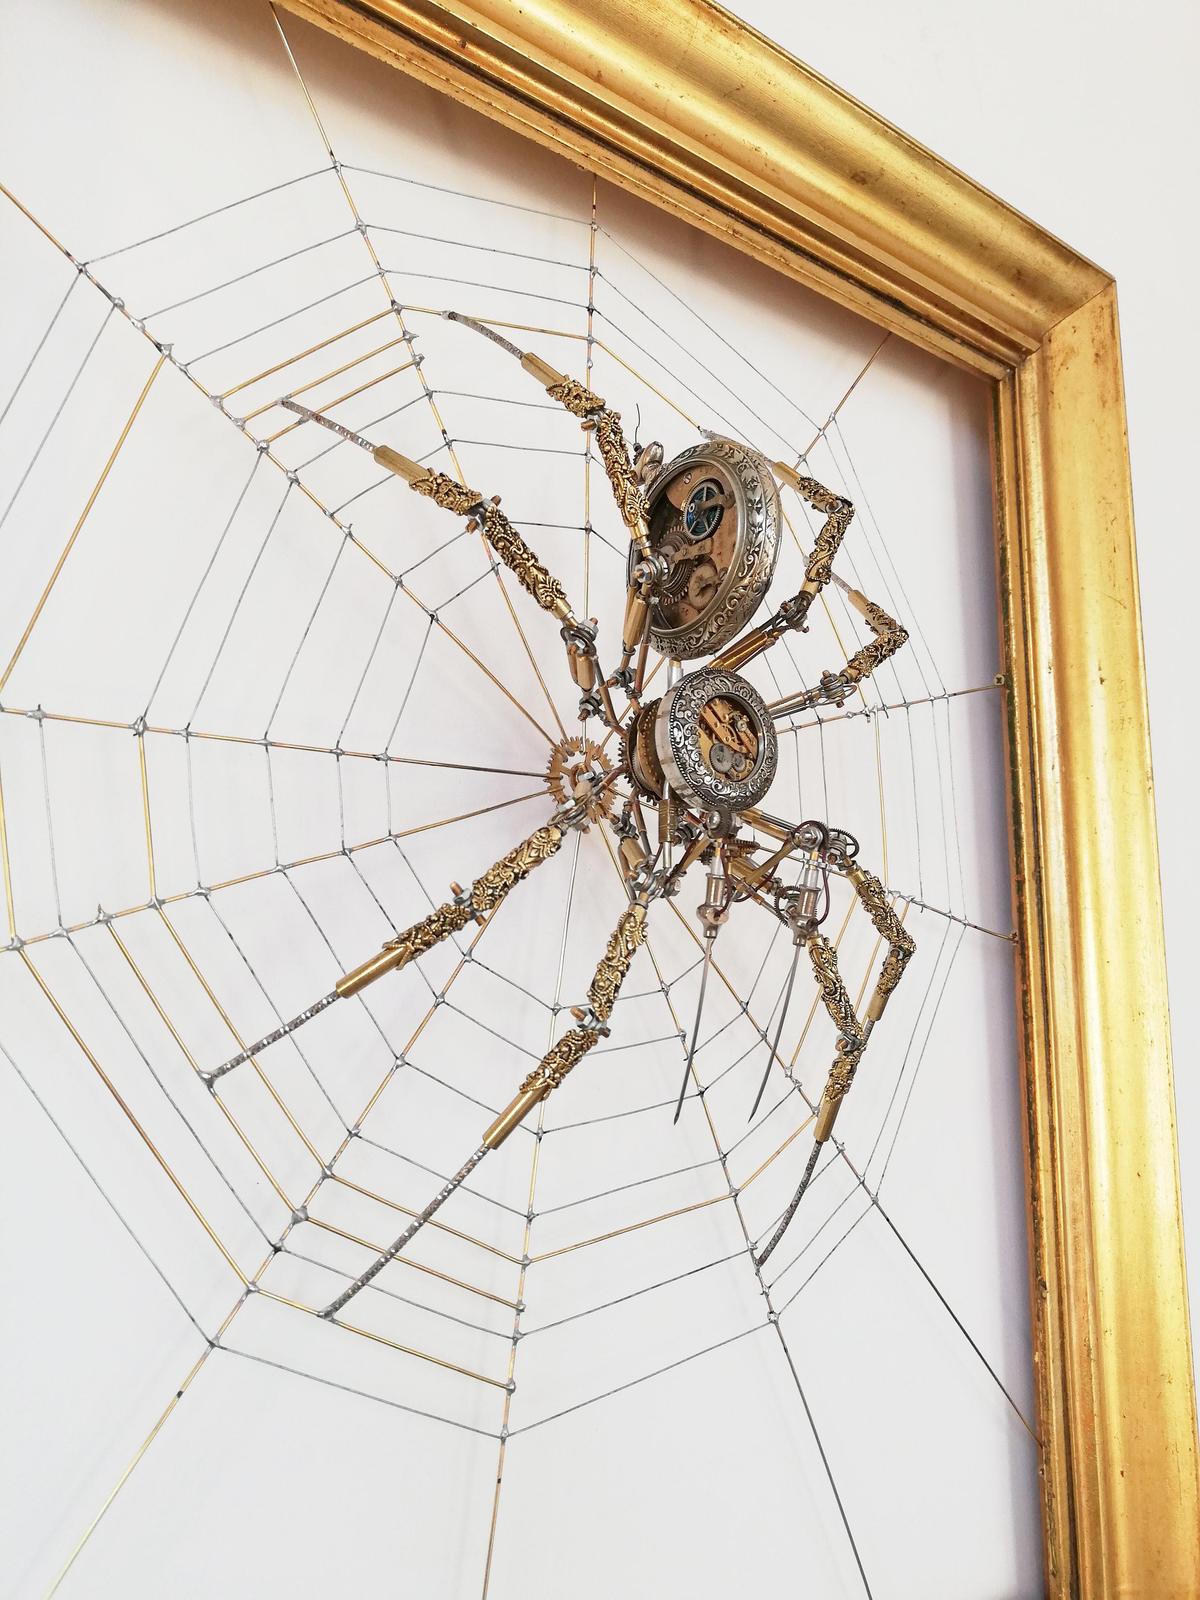 A mechanical "steampunk" spider created by Hungarian artist Peter Szucsy, 46 (Caters News)